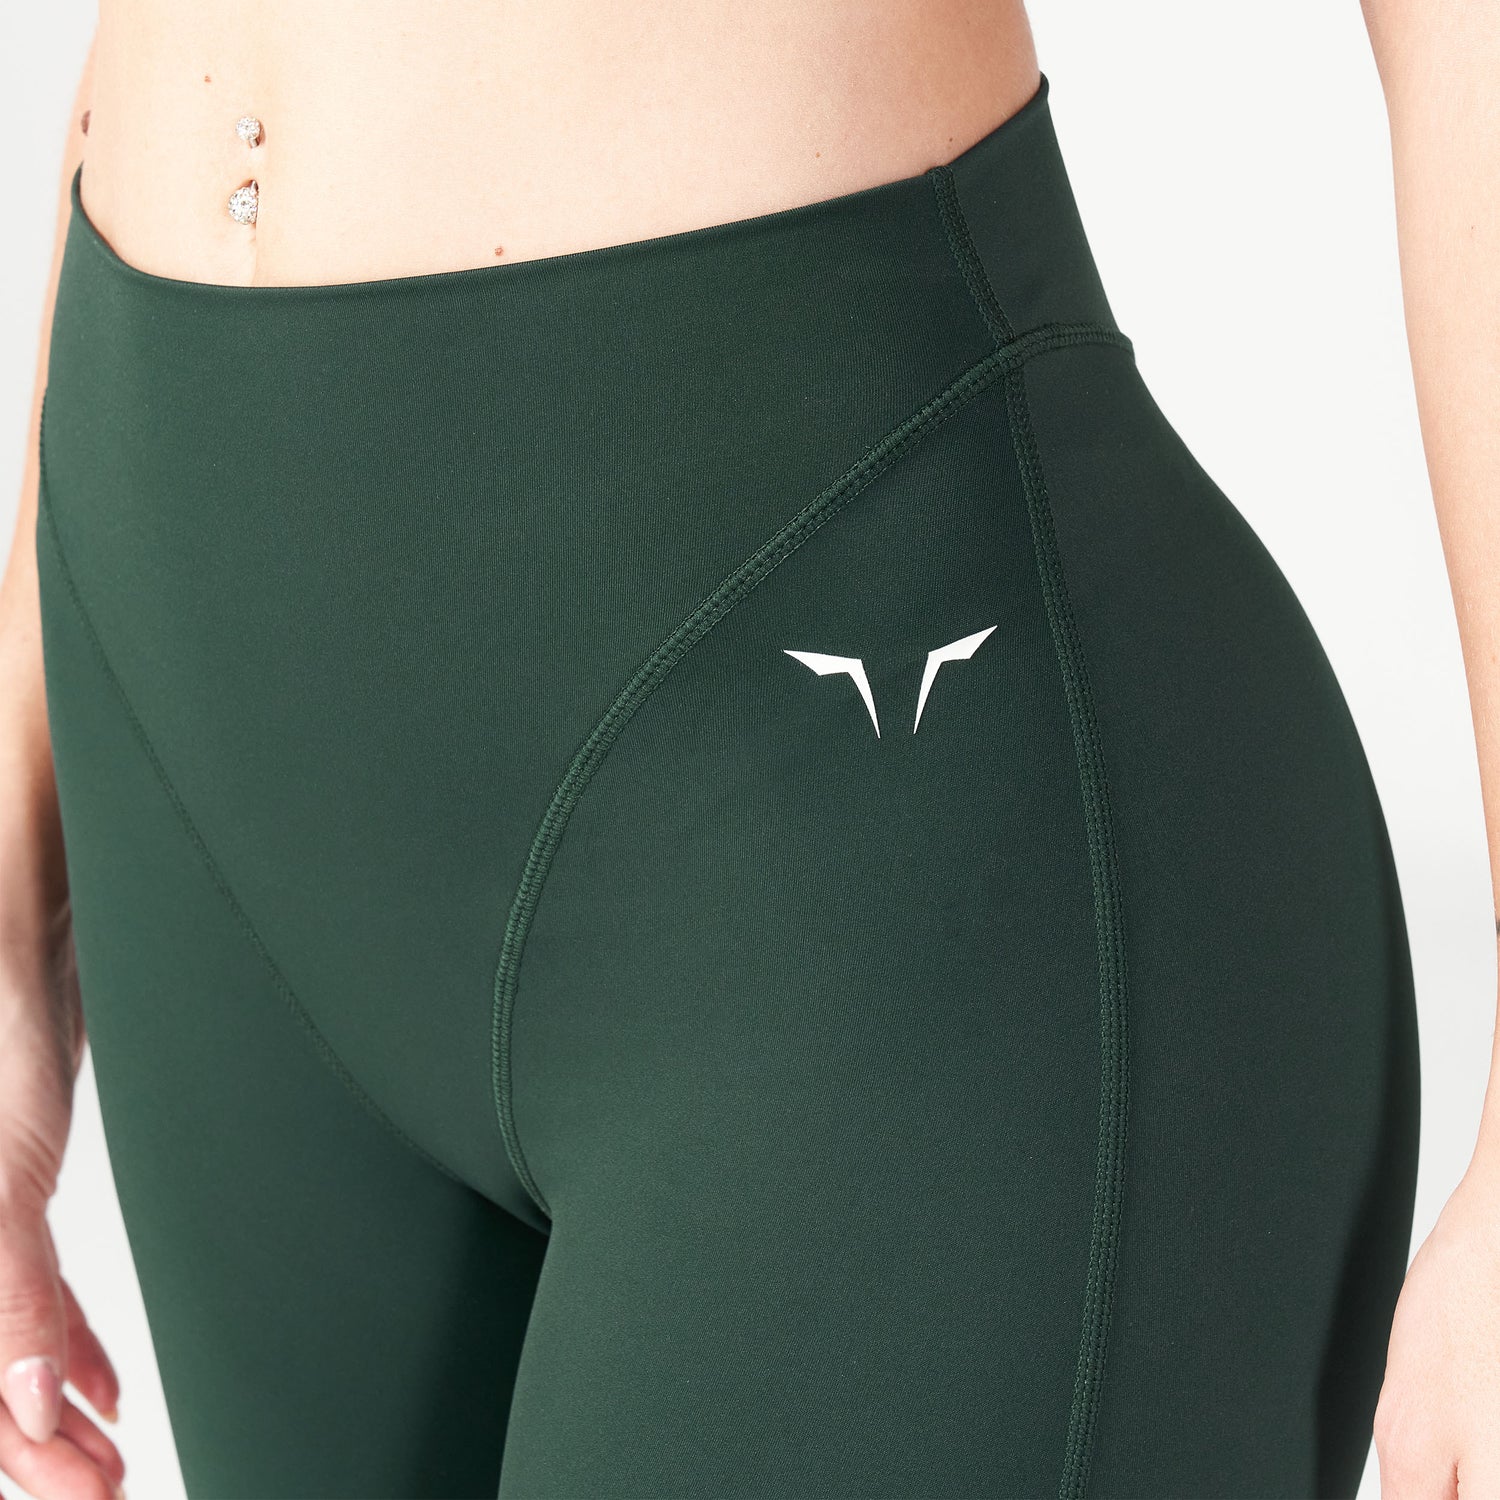 squatwolf-workout-clothes-core-v-cropped-leggings-green-gym-leggings-for-women